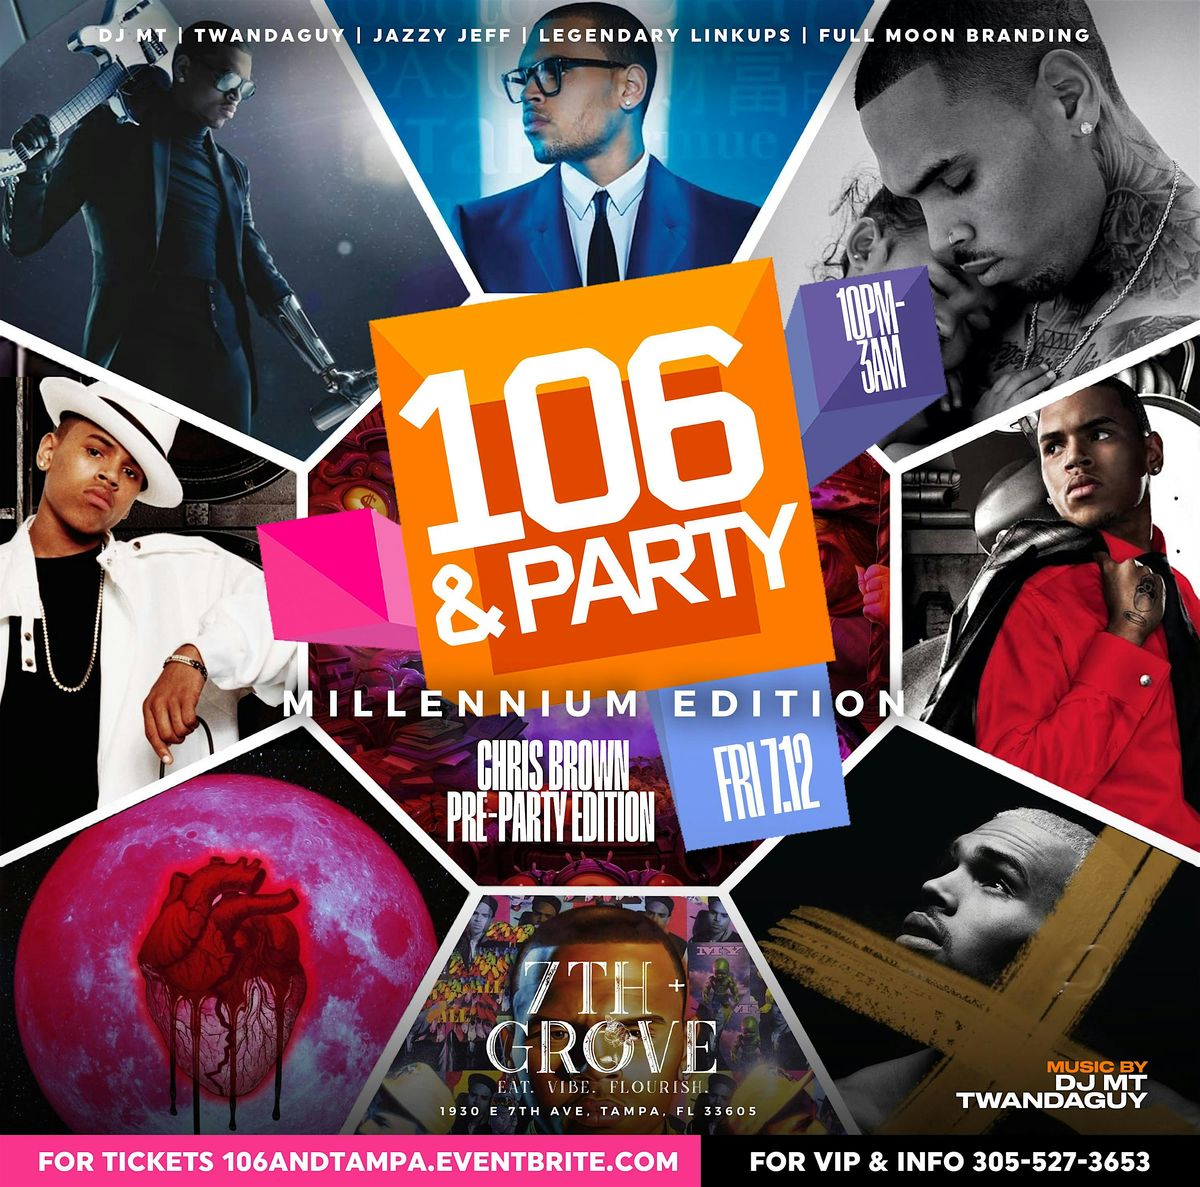 106 & PARTY TAMPA BAY - CHRIS BROWN PRE-PARTY EDITION